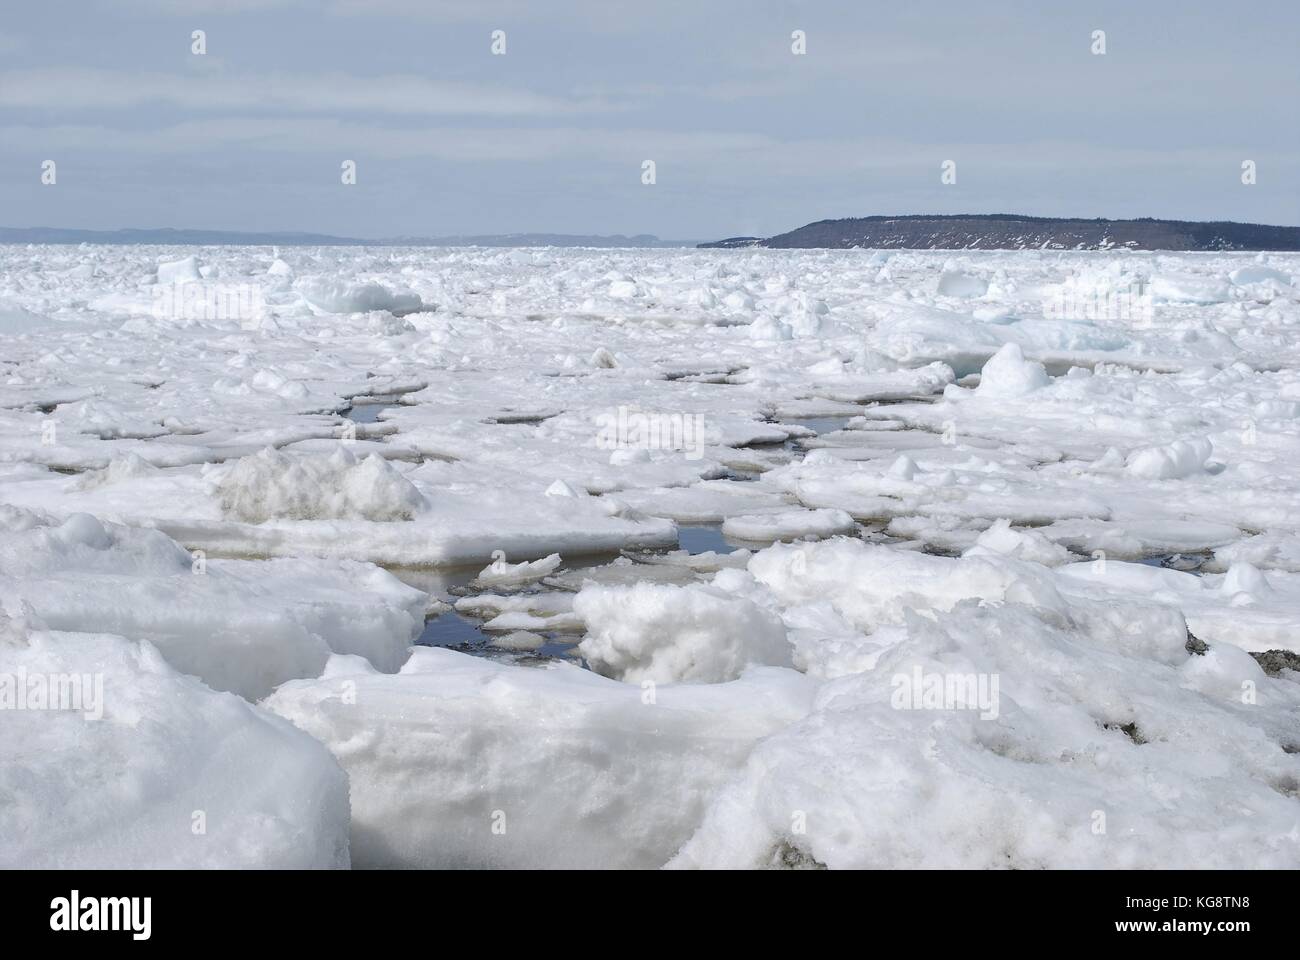 Pack Ice in the bay, Conception Bay South, Newfoundland Labrador Stock Photo